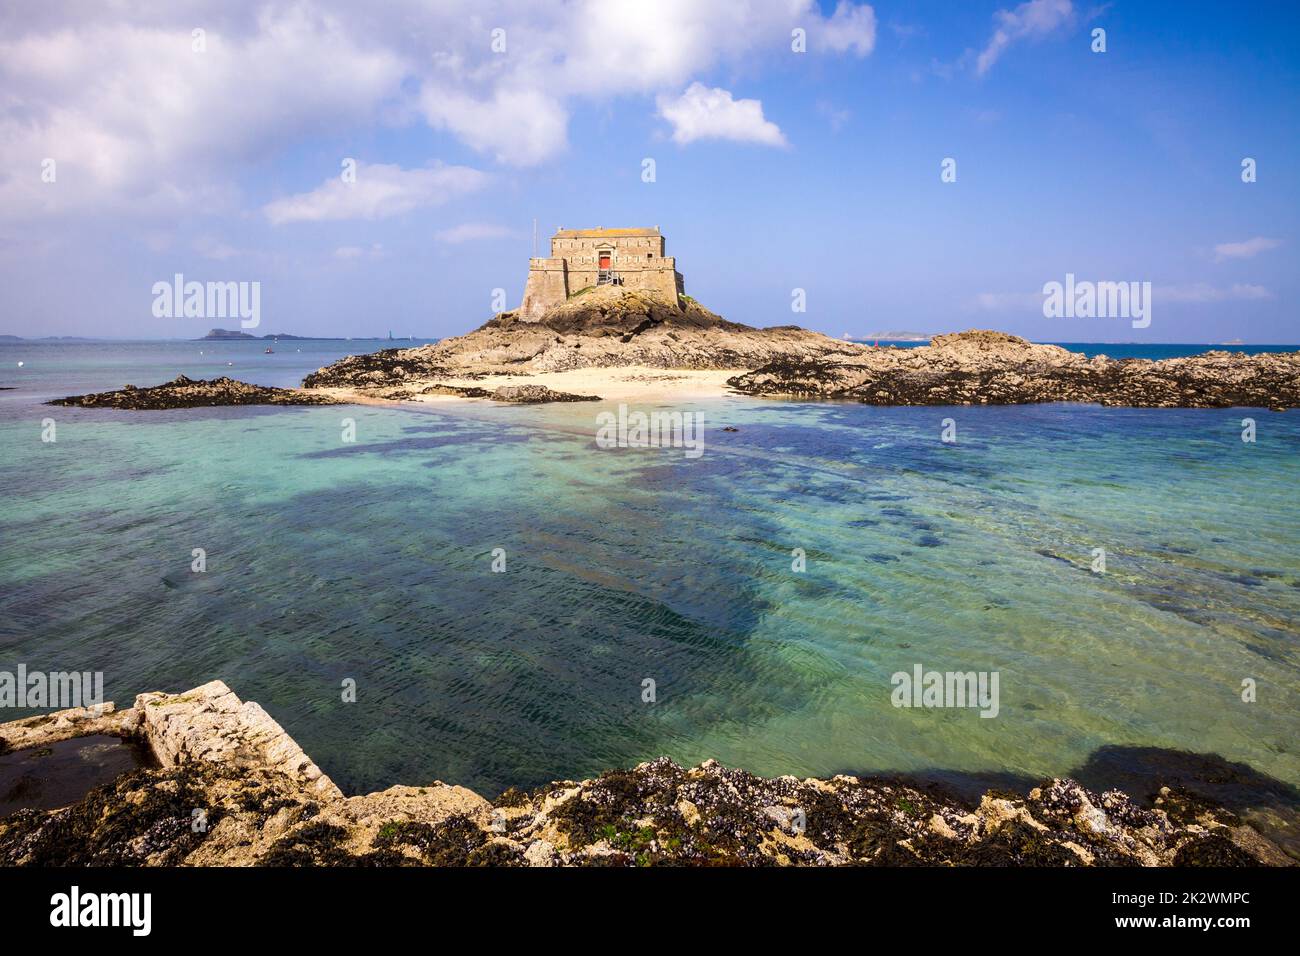 Fortified castel, Fort du Petit Be, beach and sea, Saint-Malo city, Brittany, France Stock Photo